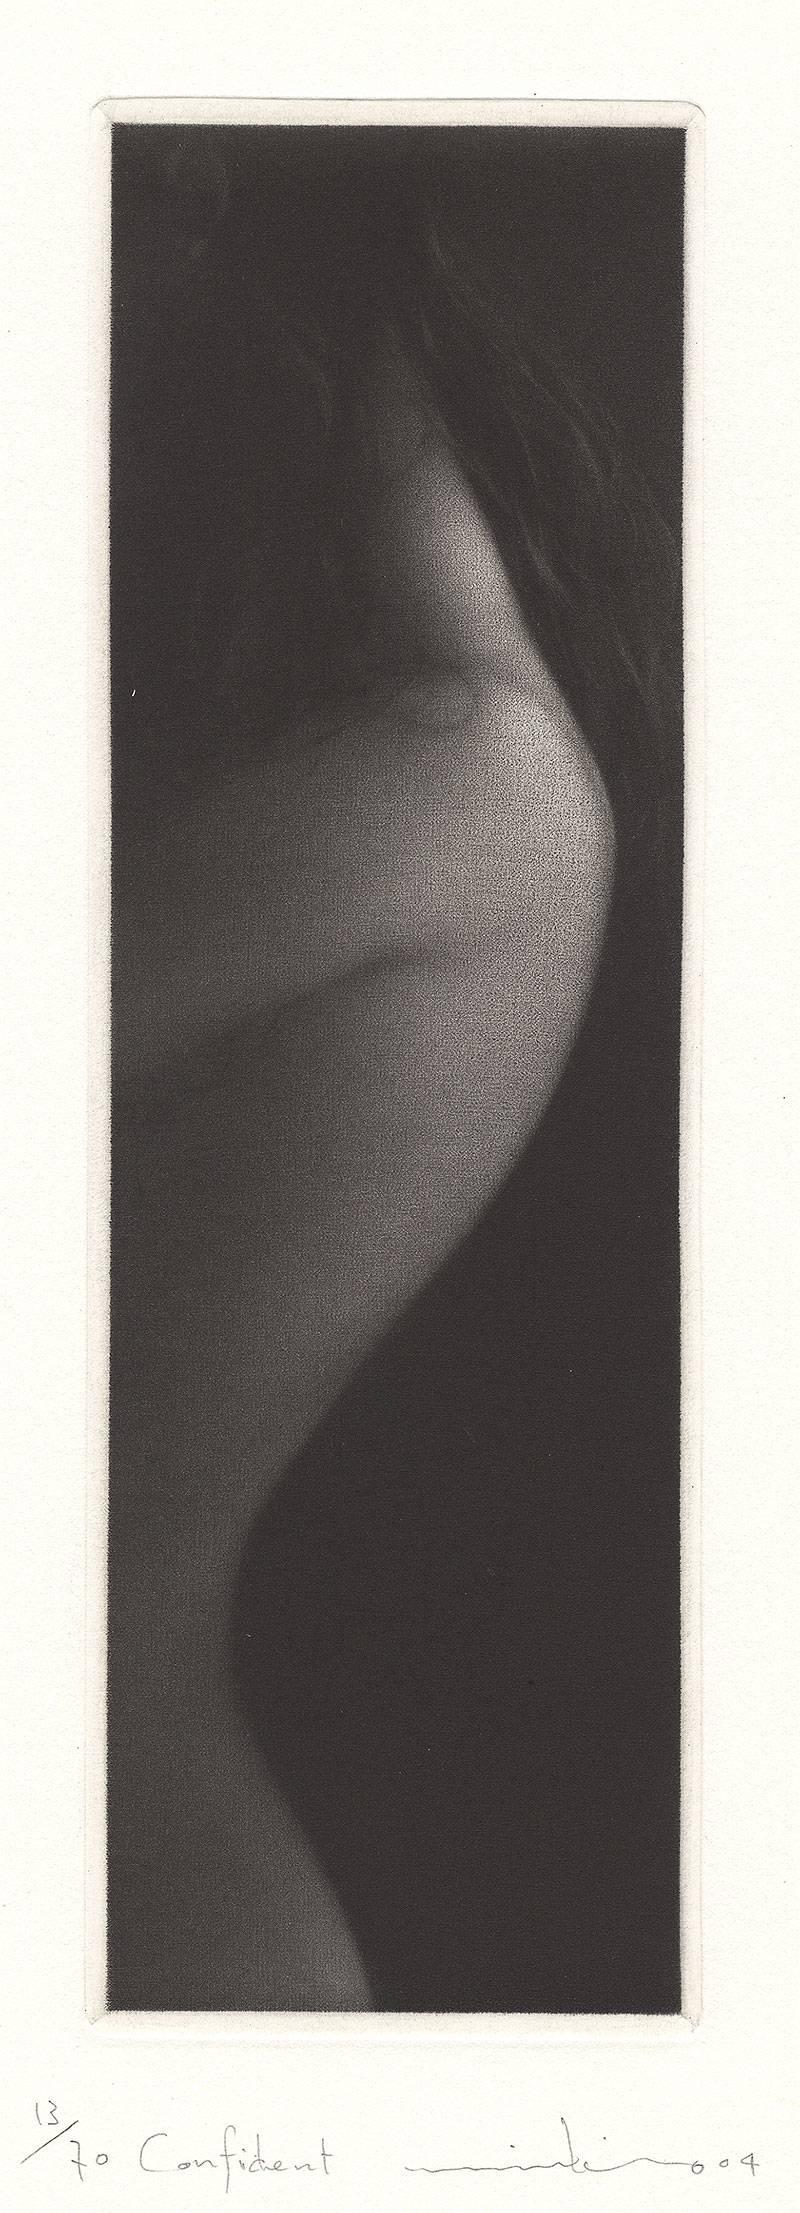 Mikio Watanabe Nude Print - Confident (profile of young nude girl with wisps of hair on her neck)